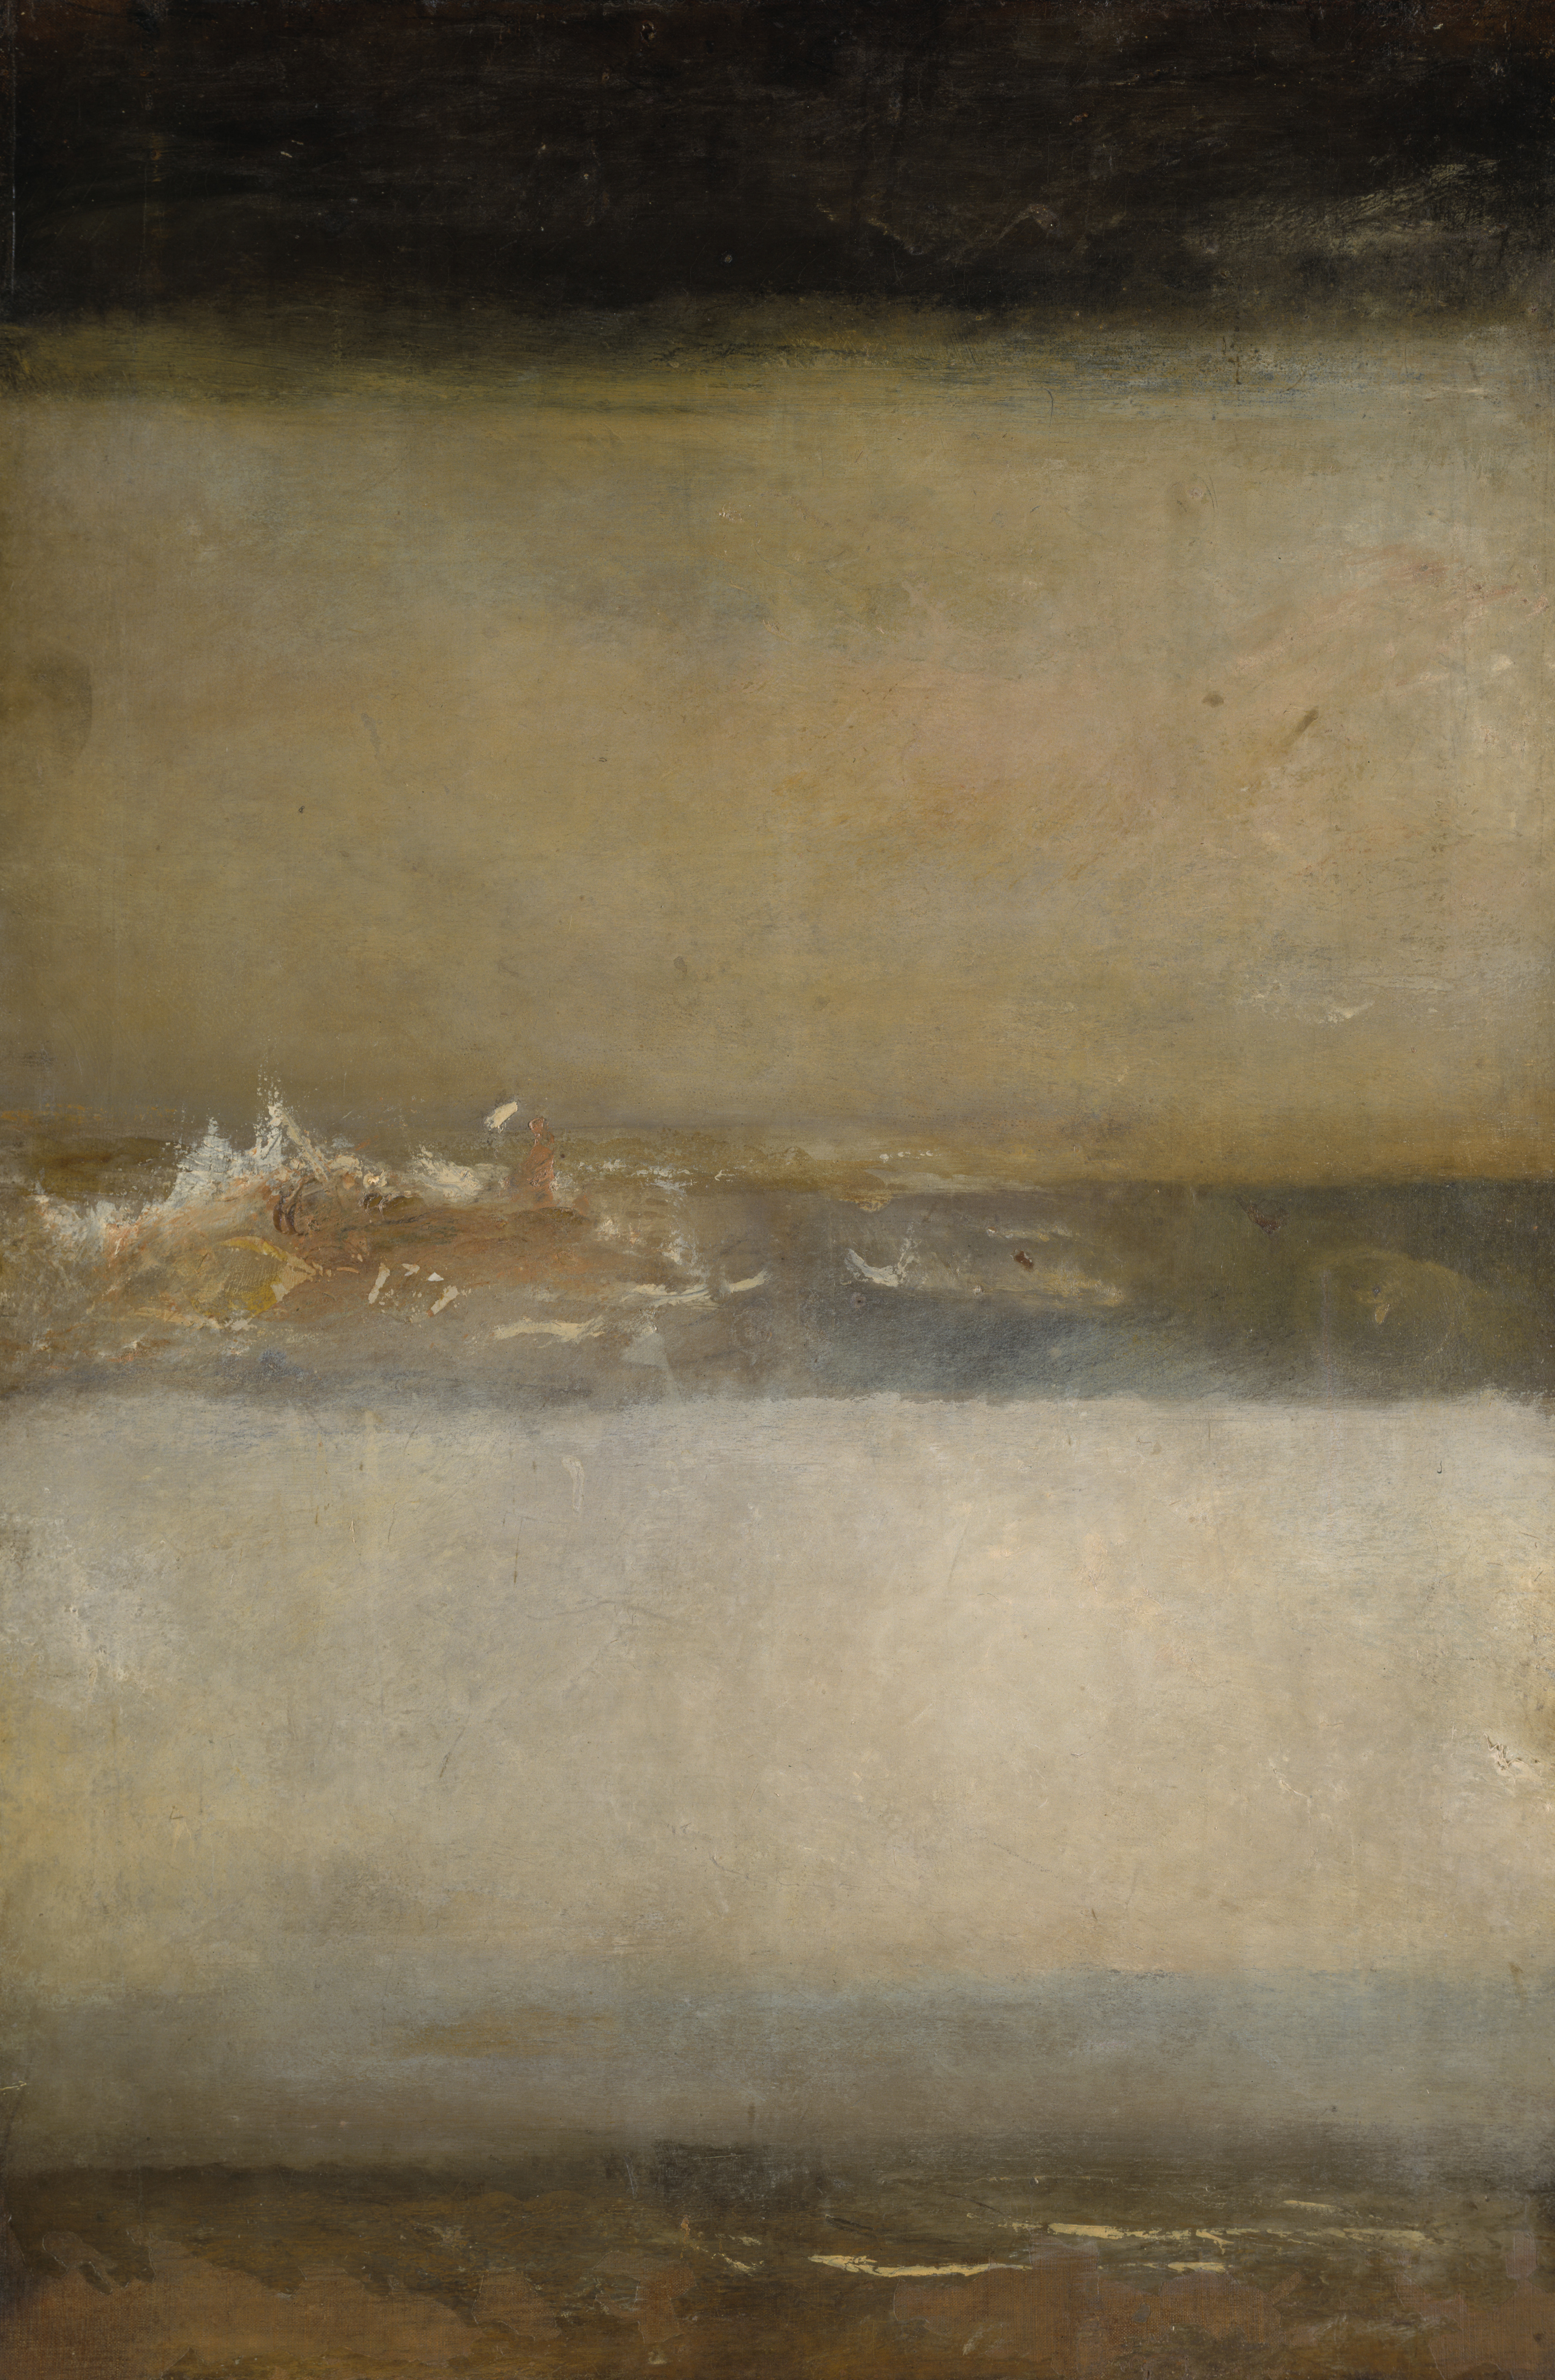 Three Seascapes / Drei Seeansichten, ca. 1827, Joseph Mallord William Turner (1775-1851). Tate: Accepted by the nation as part of the Turner Bequest 1856 © Photo / Foto Tate